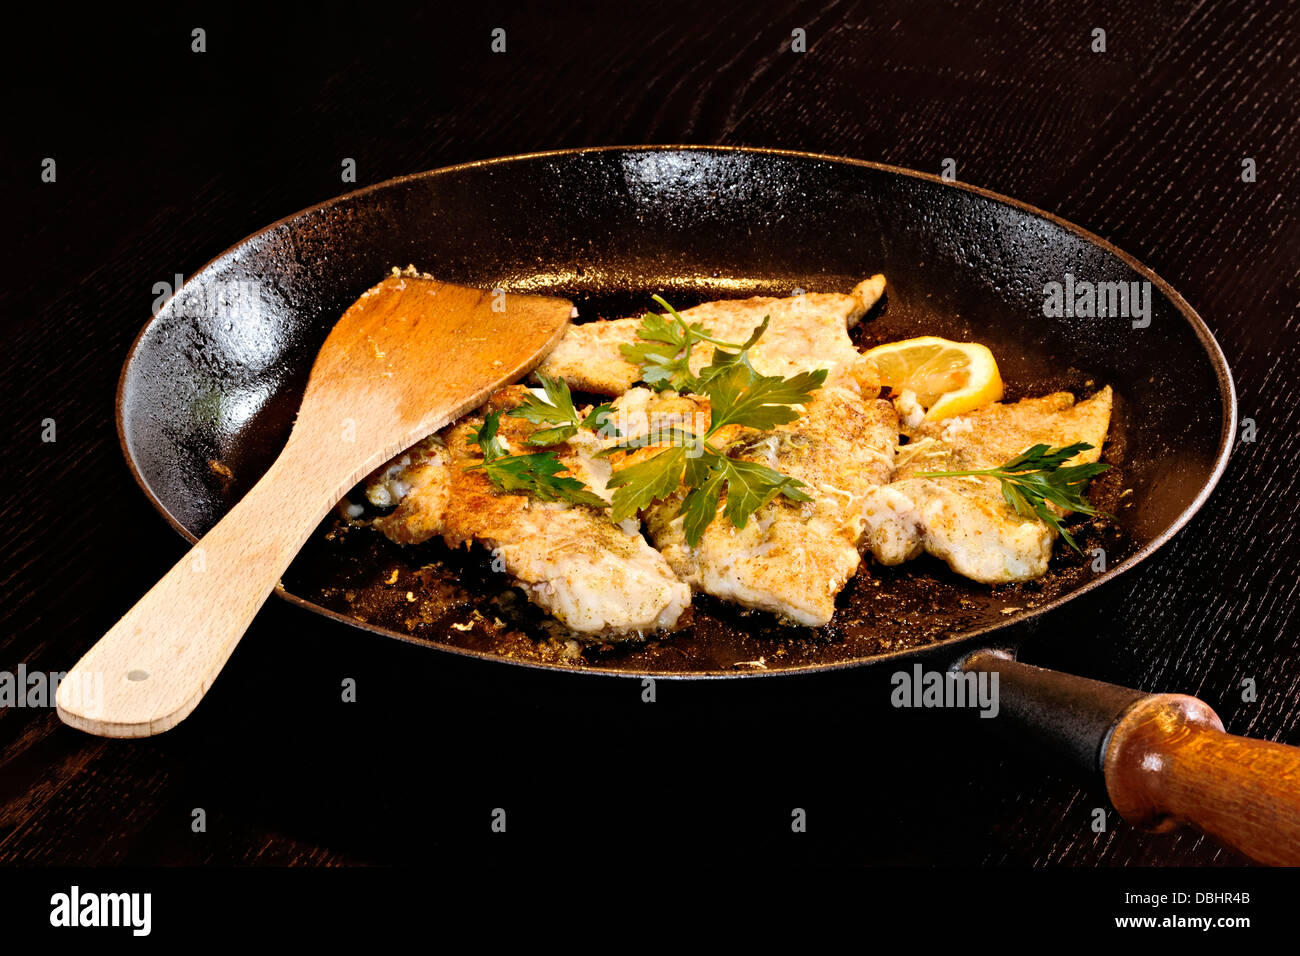 Fried Fish in Pan with Parsley Stock Photo